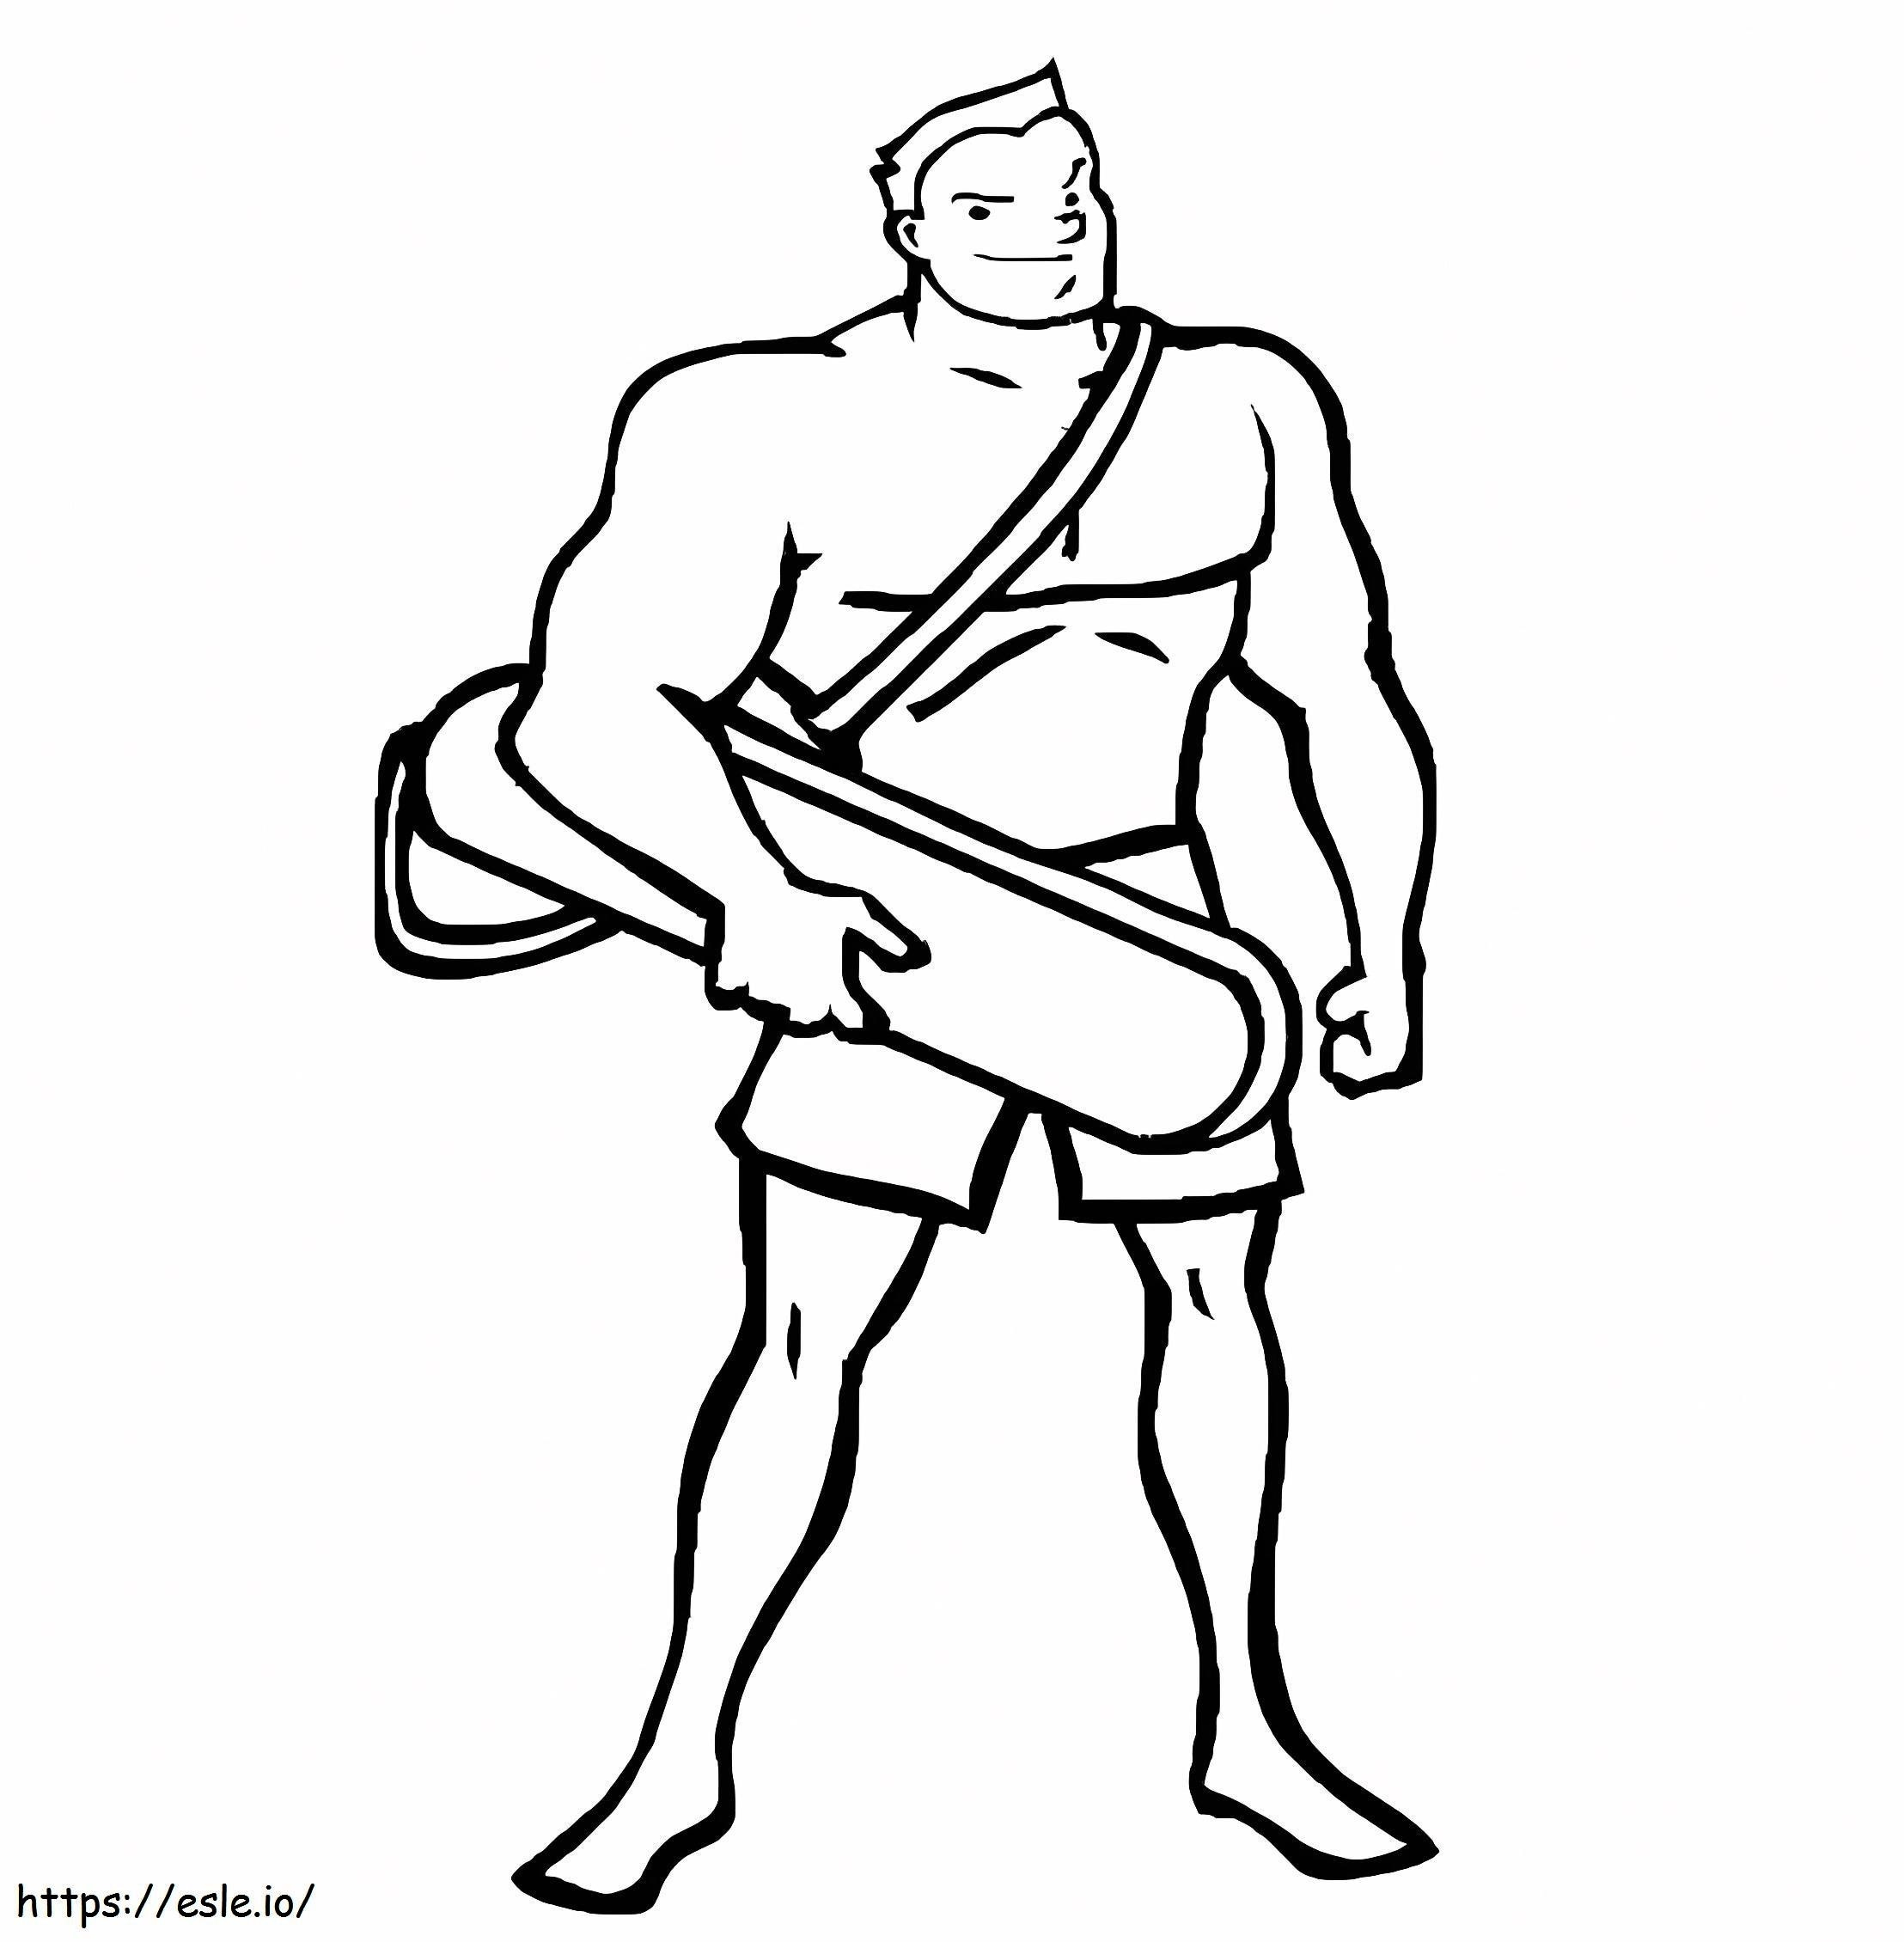 Strong Lifeguard coloring page